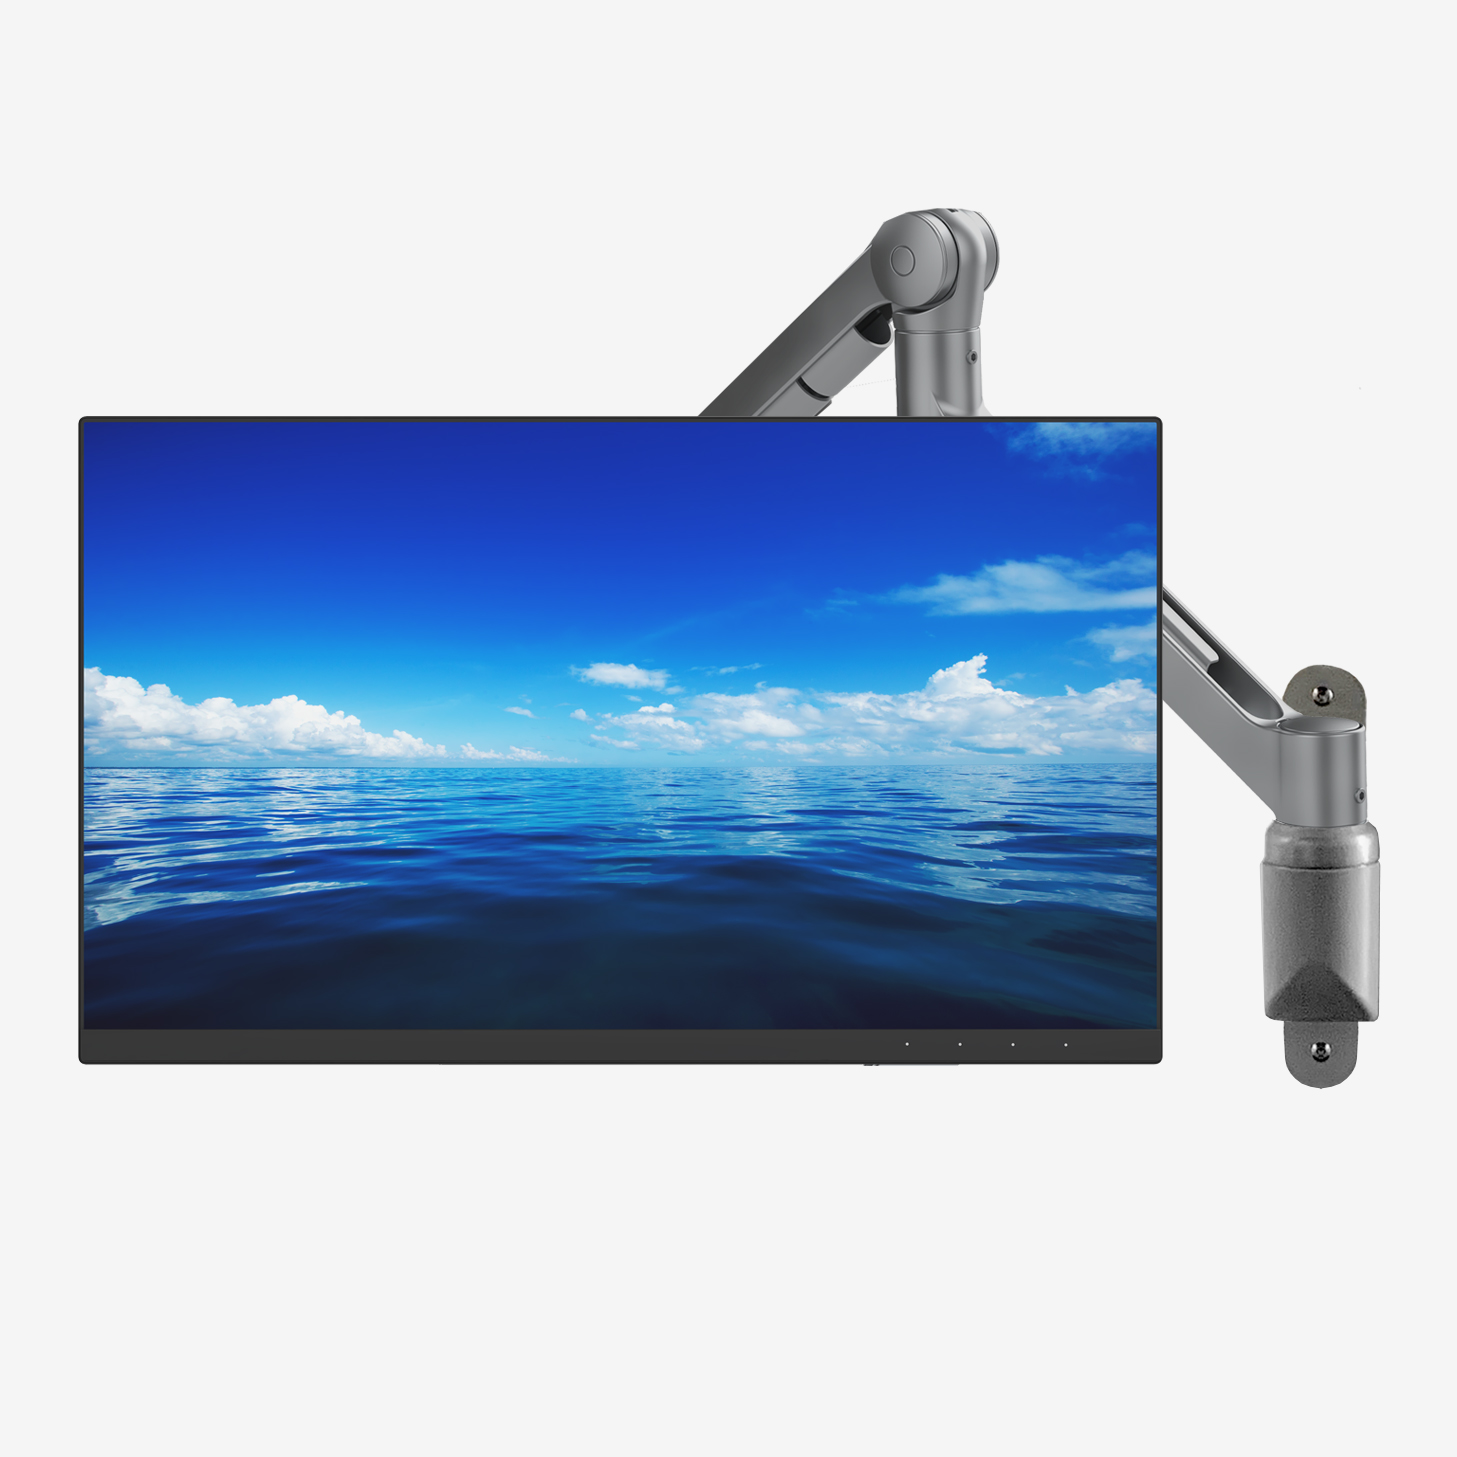 Buy monitor mount for industry